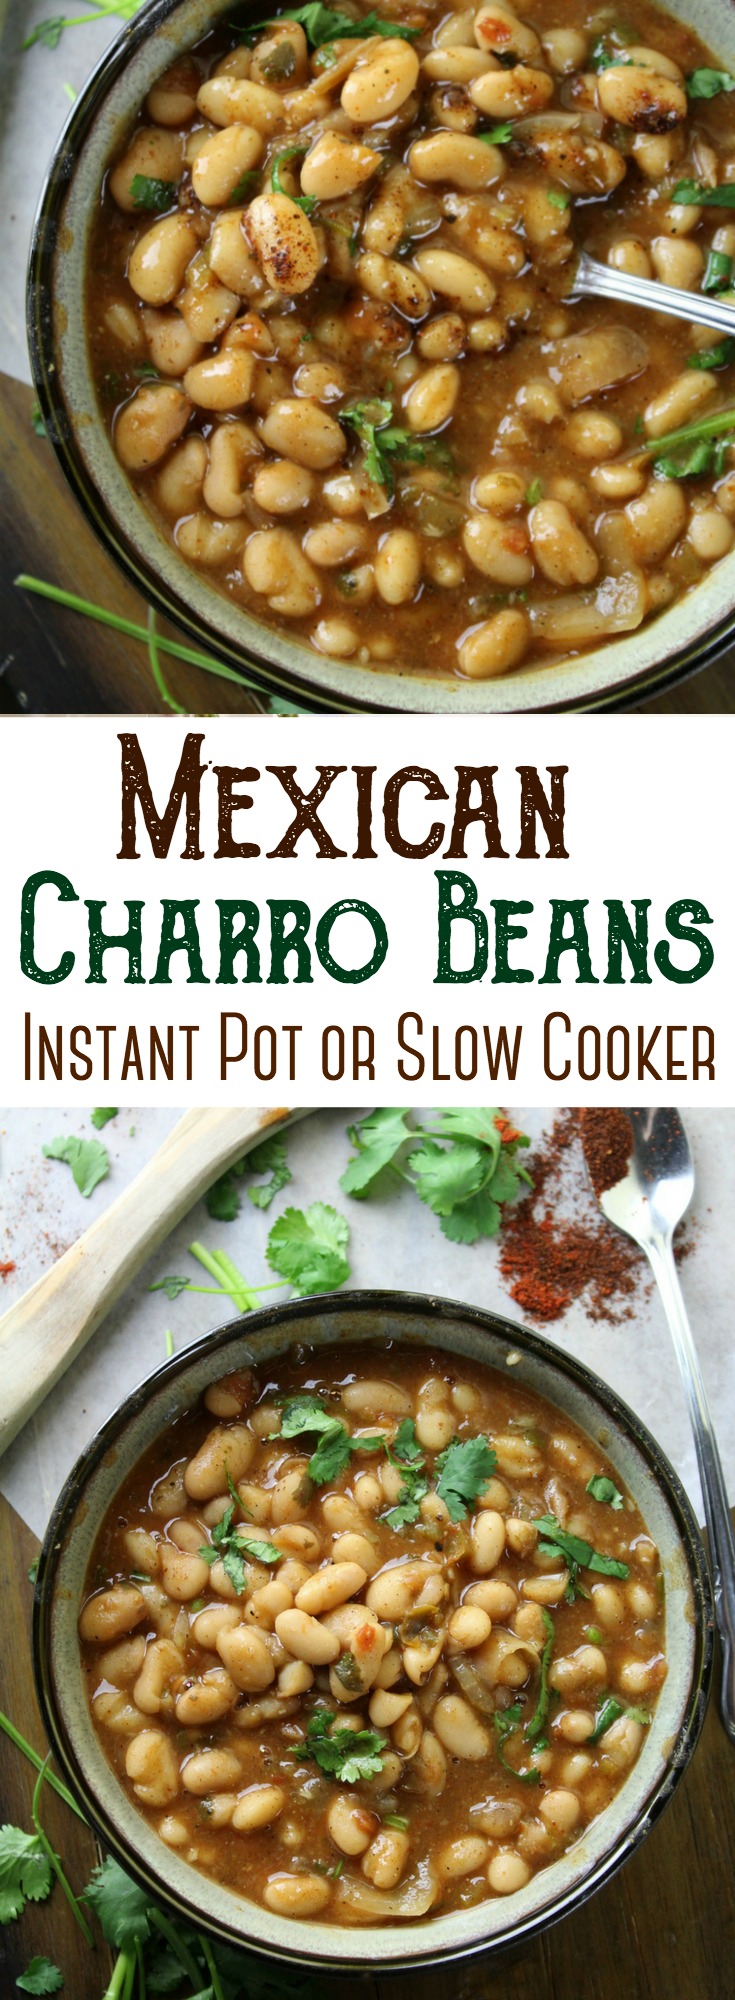 Charro beans are Mexican-style pinto beans cooked in a broth that features bacon, onions, garlic, smoky peppers and other delicious spices.   #beans #mexican #charrobeans #pressurecooker #InstantPot #slowcooker #sidedish 